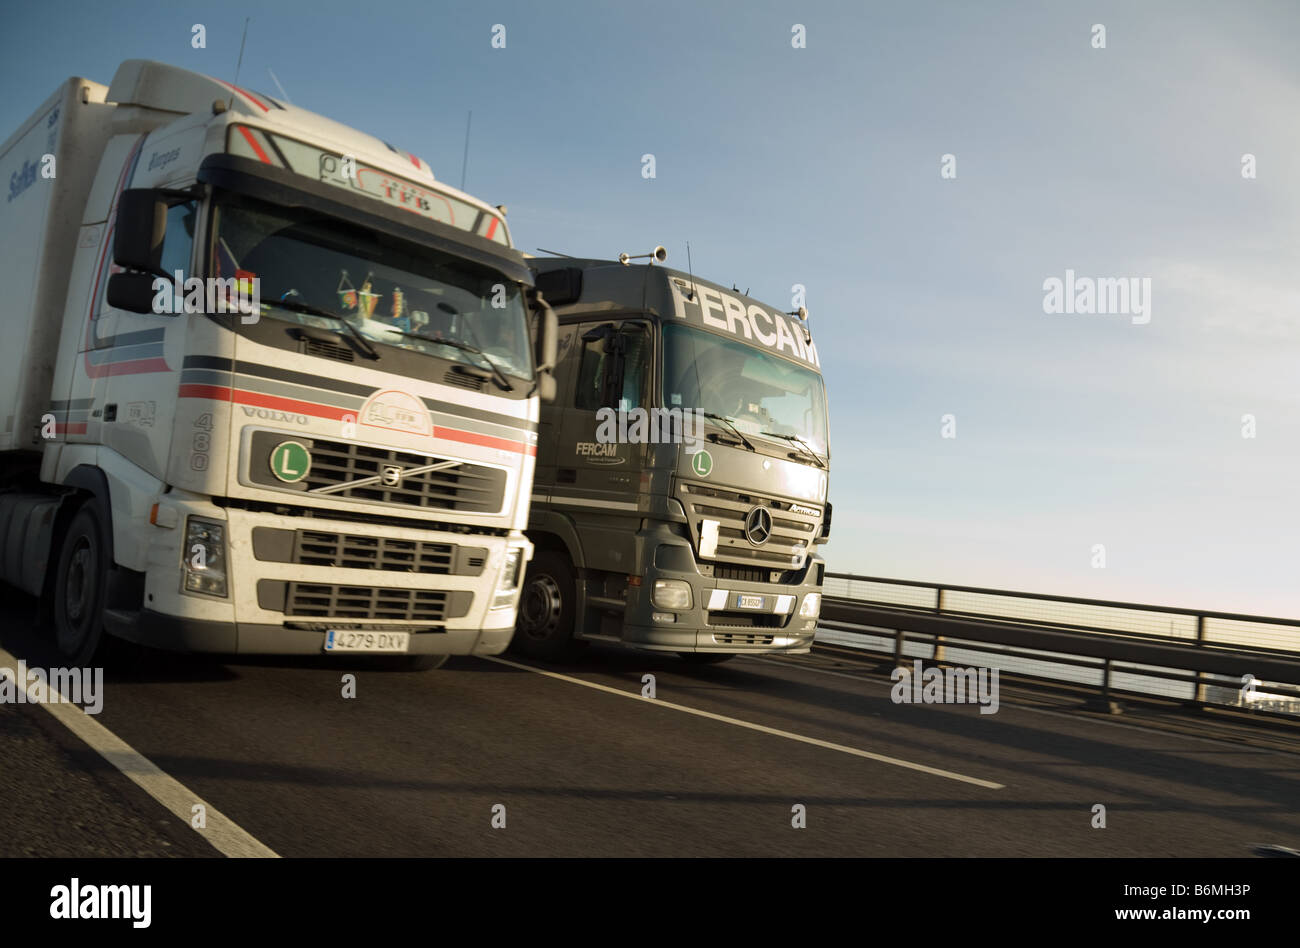 HGV UK; Two articulated lorries or HGVs overtaking on the M25 motorway in Dartford, Kent UK Stock Photo